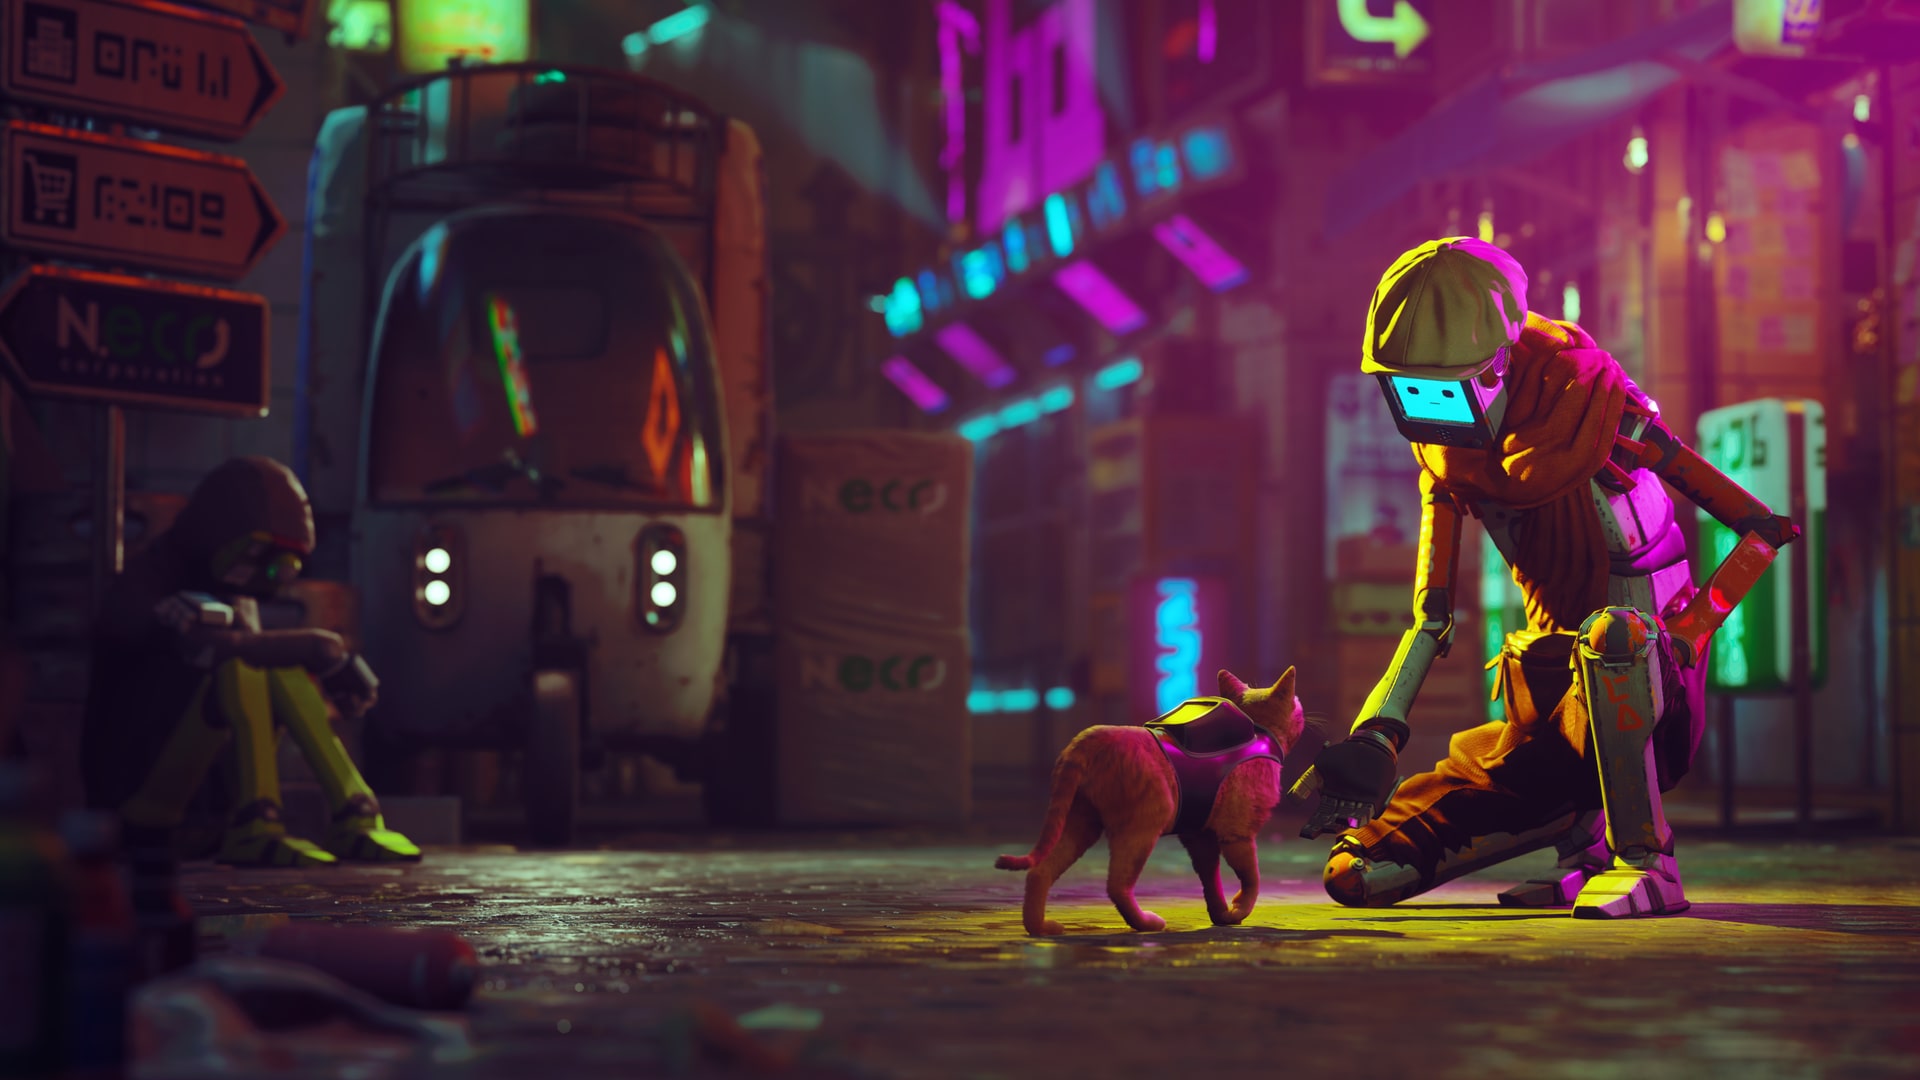 Here's where to buy Stray on PS5, PS4 and Steam